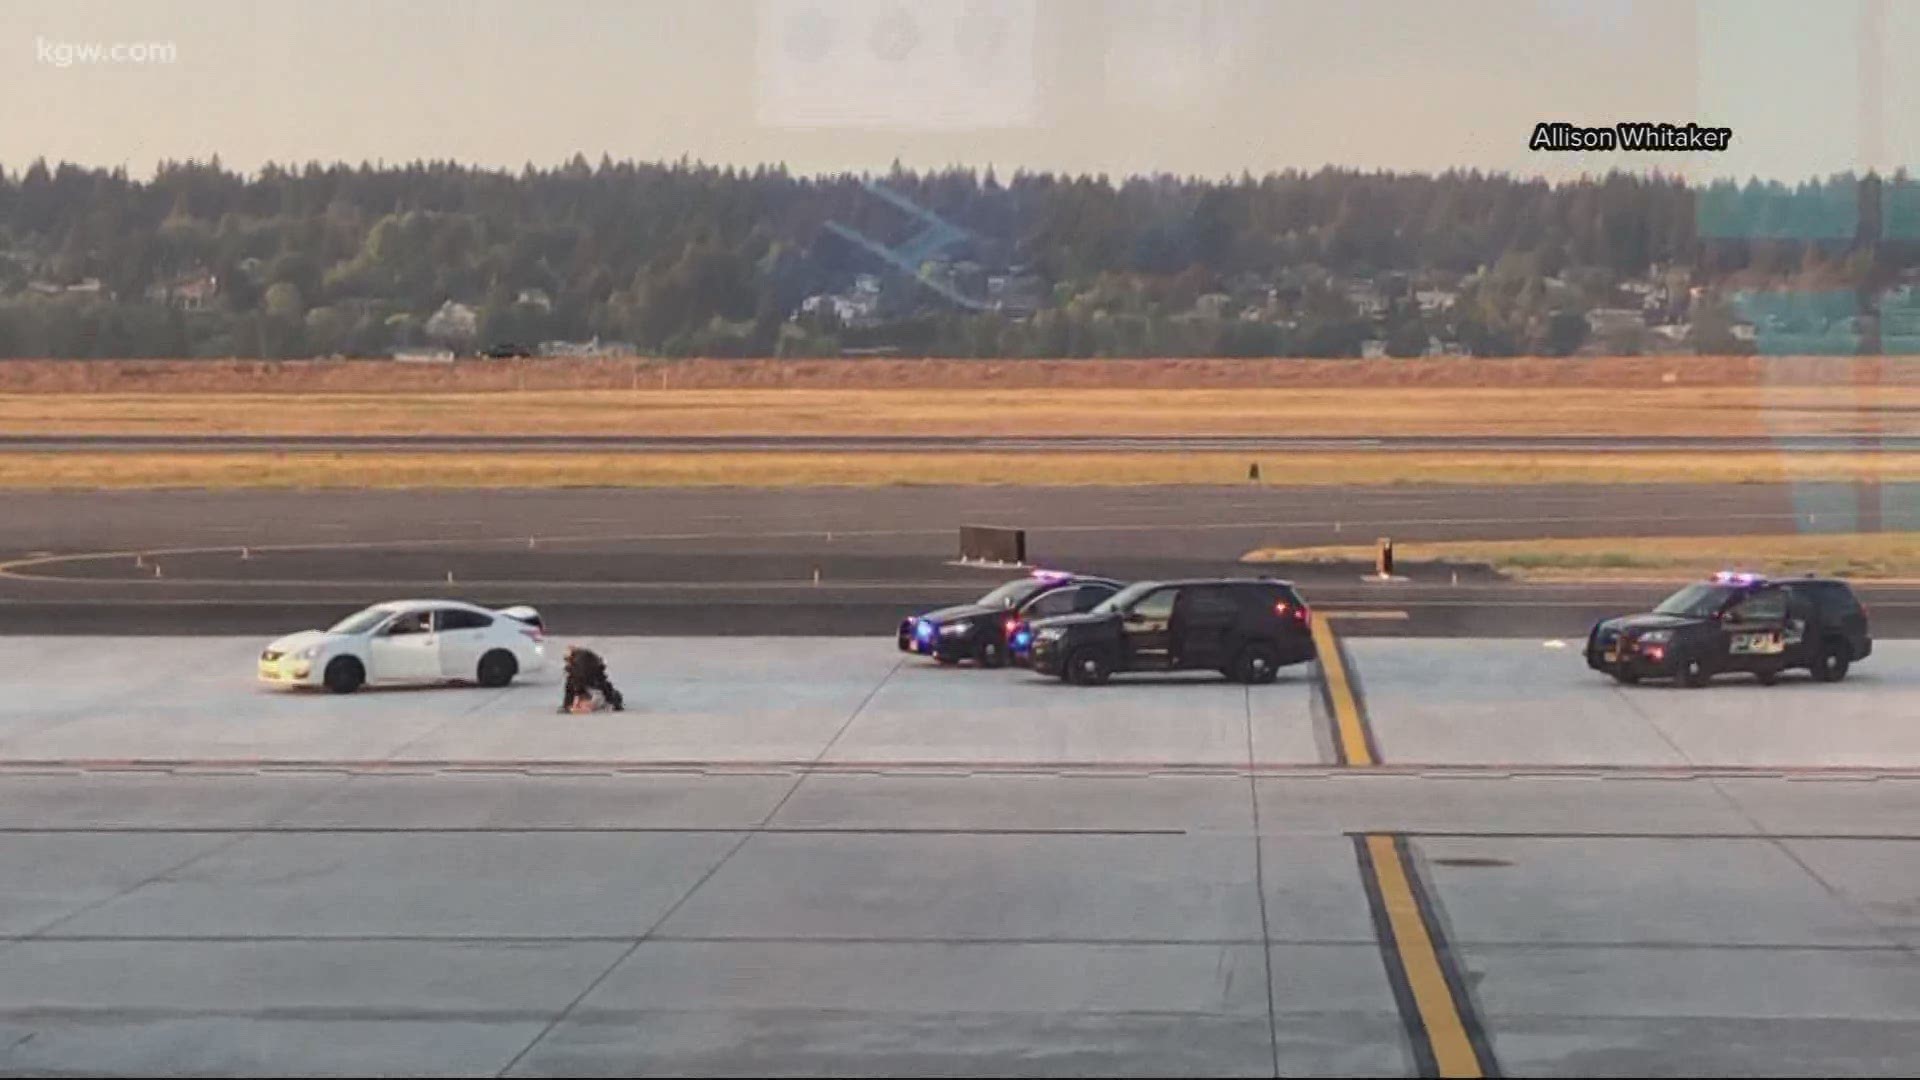 The driver took off down an active taxiway, forcing a commercial airliner to stop as the car went under its wing, investigators said.